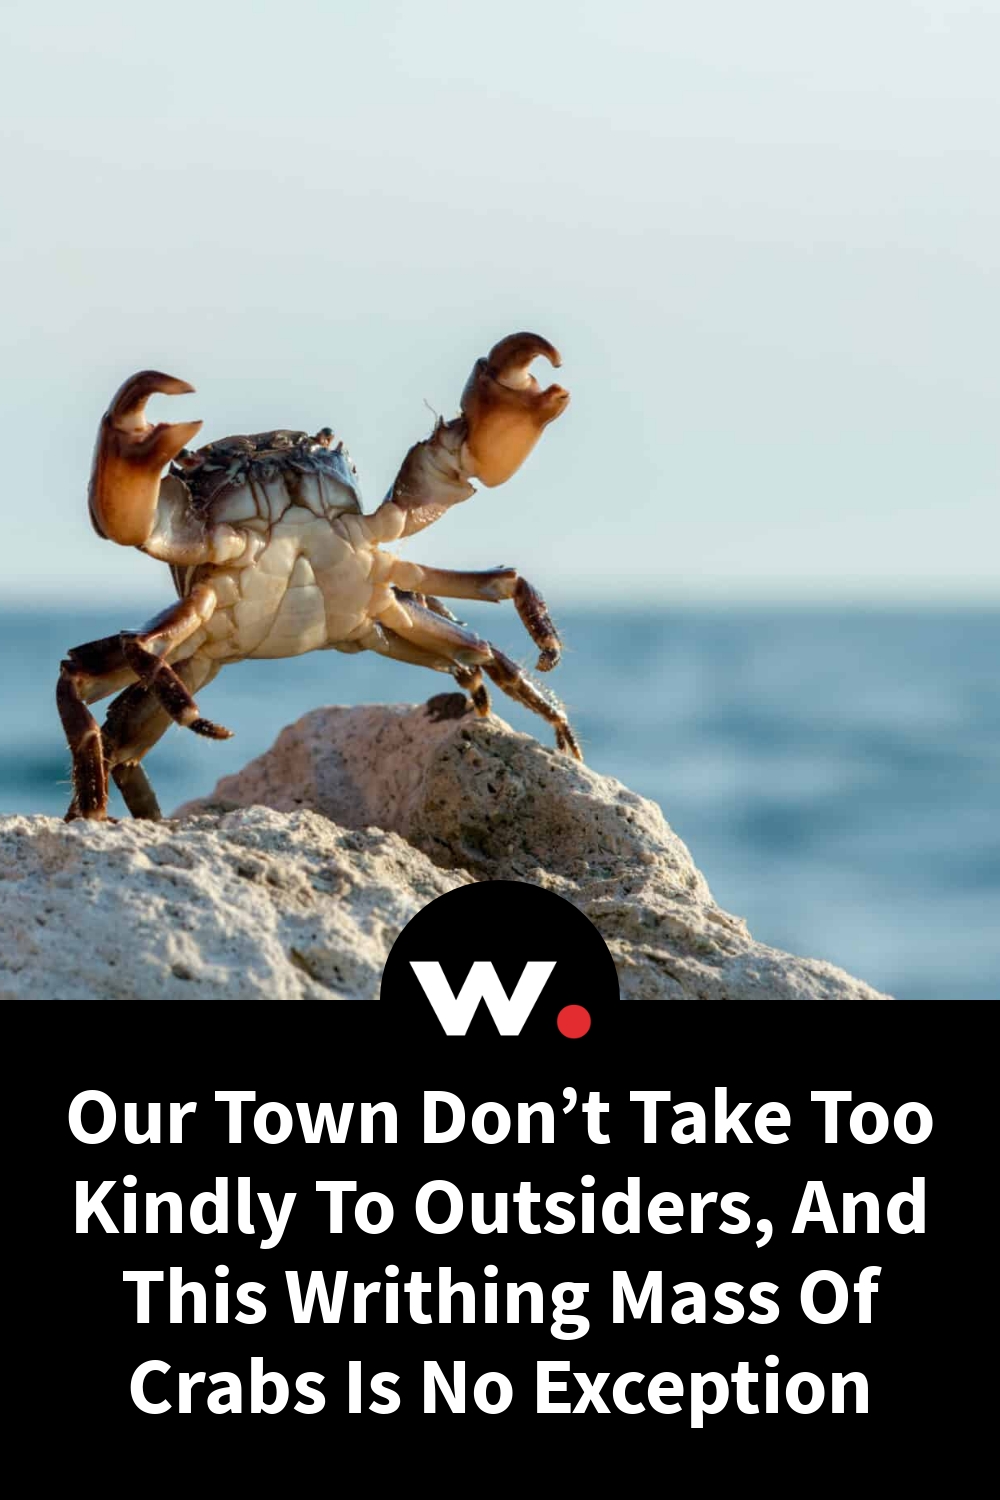 Our Town Don’t Take Too Kindly To Outsiders, And This Writhing Mass Of Crabs Is No Exception